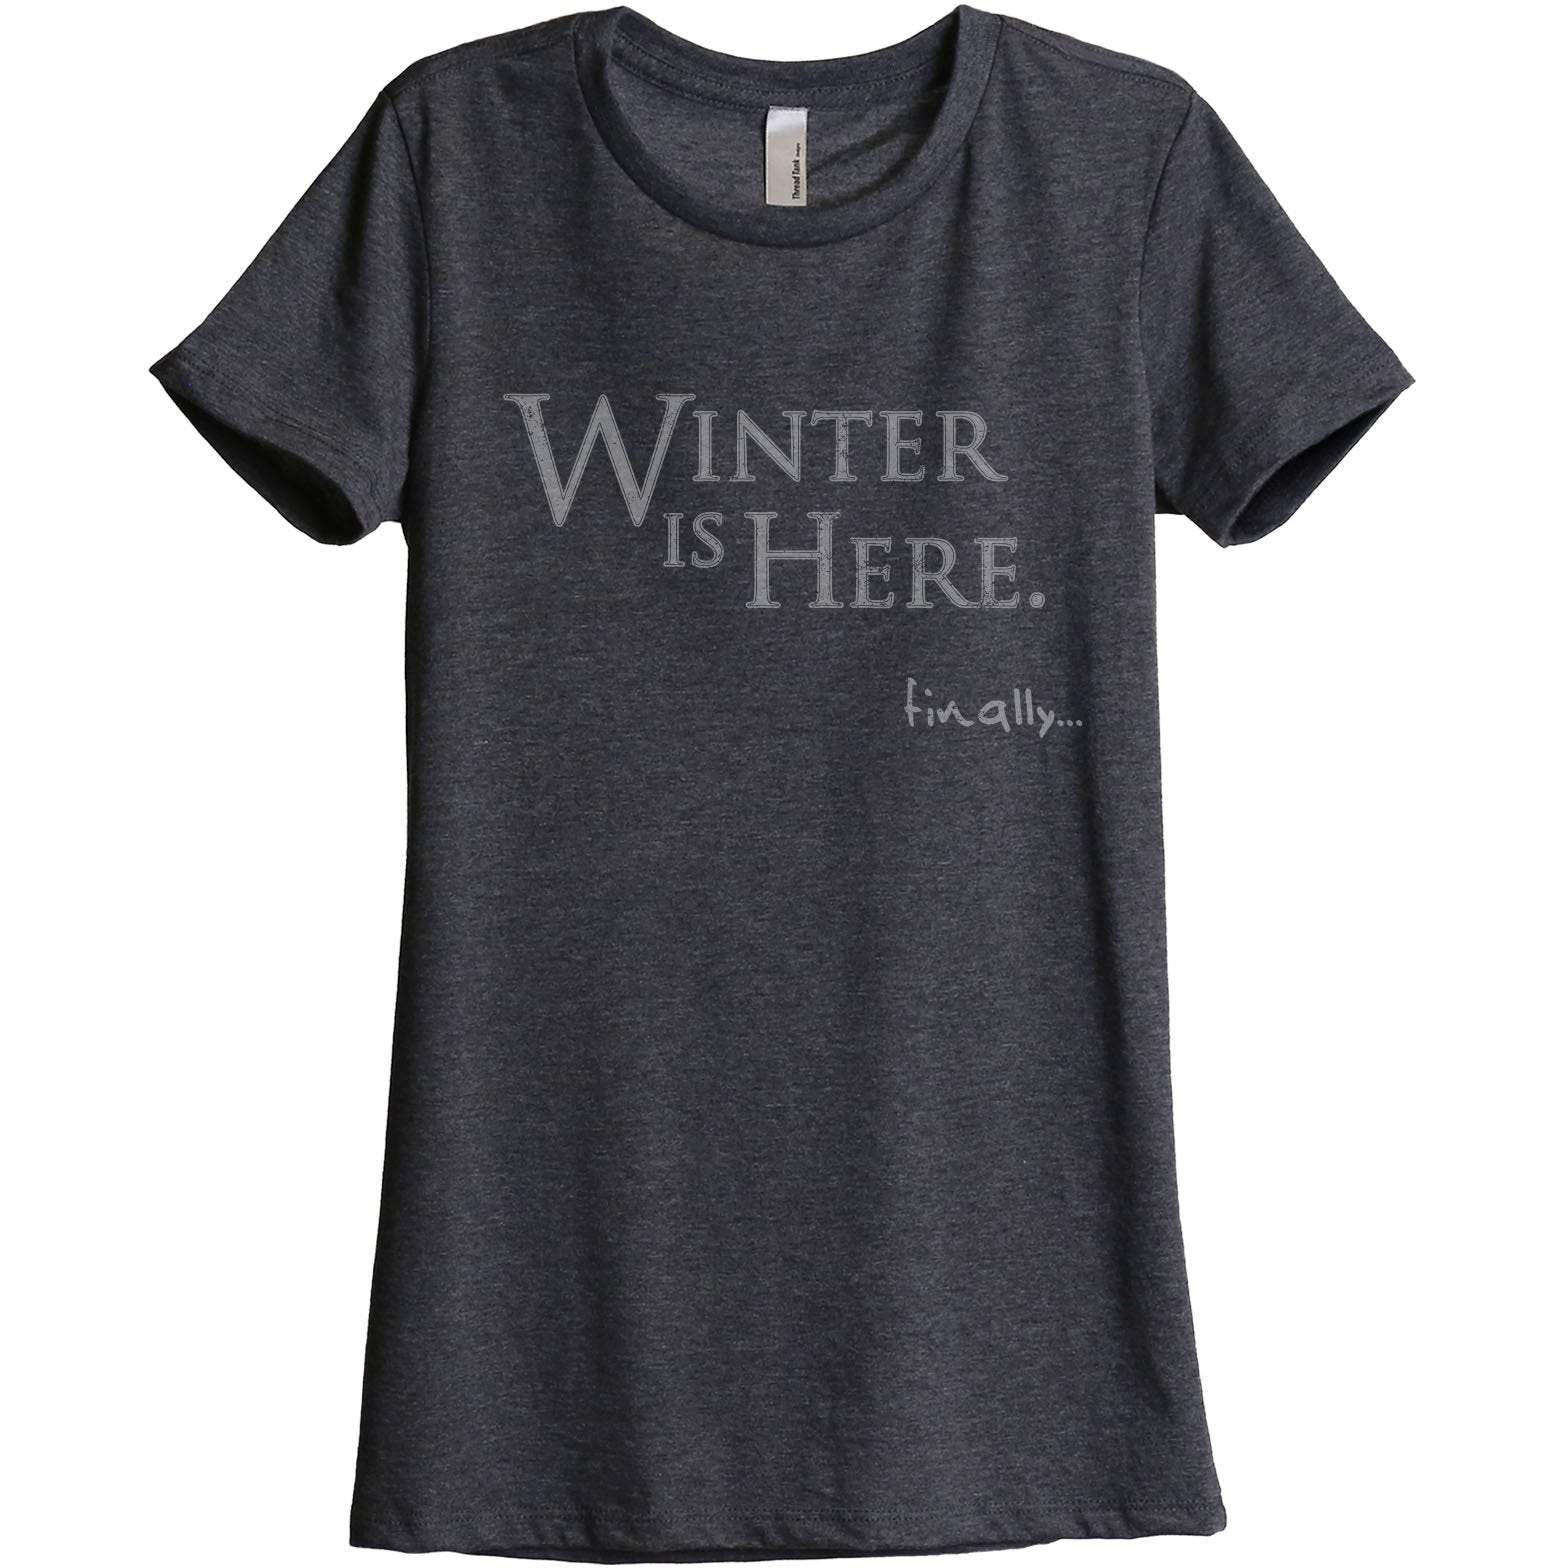 Winter Is Here - Stories You Can Wear